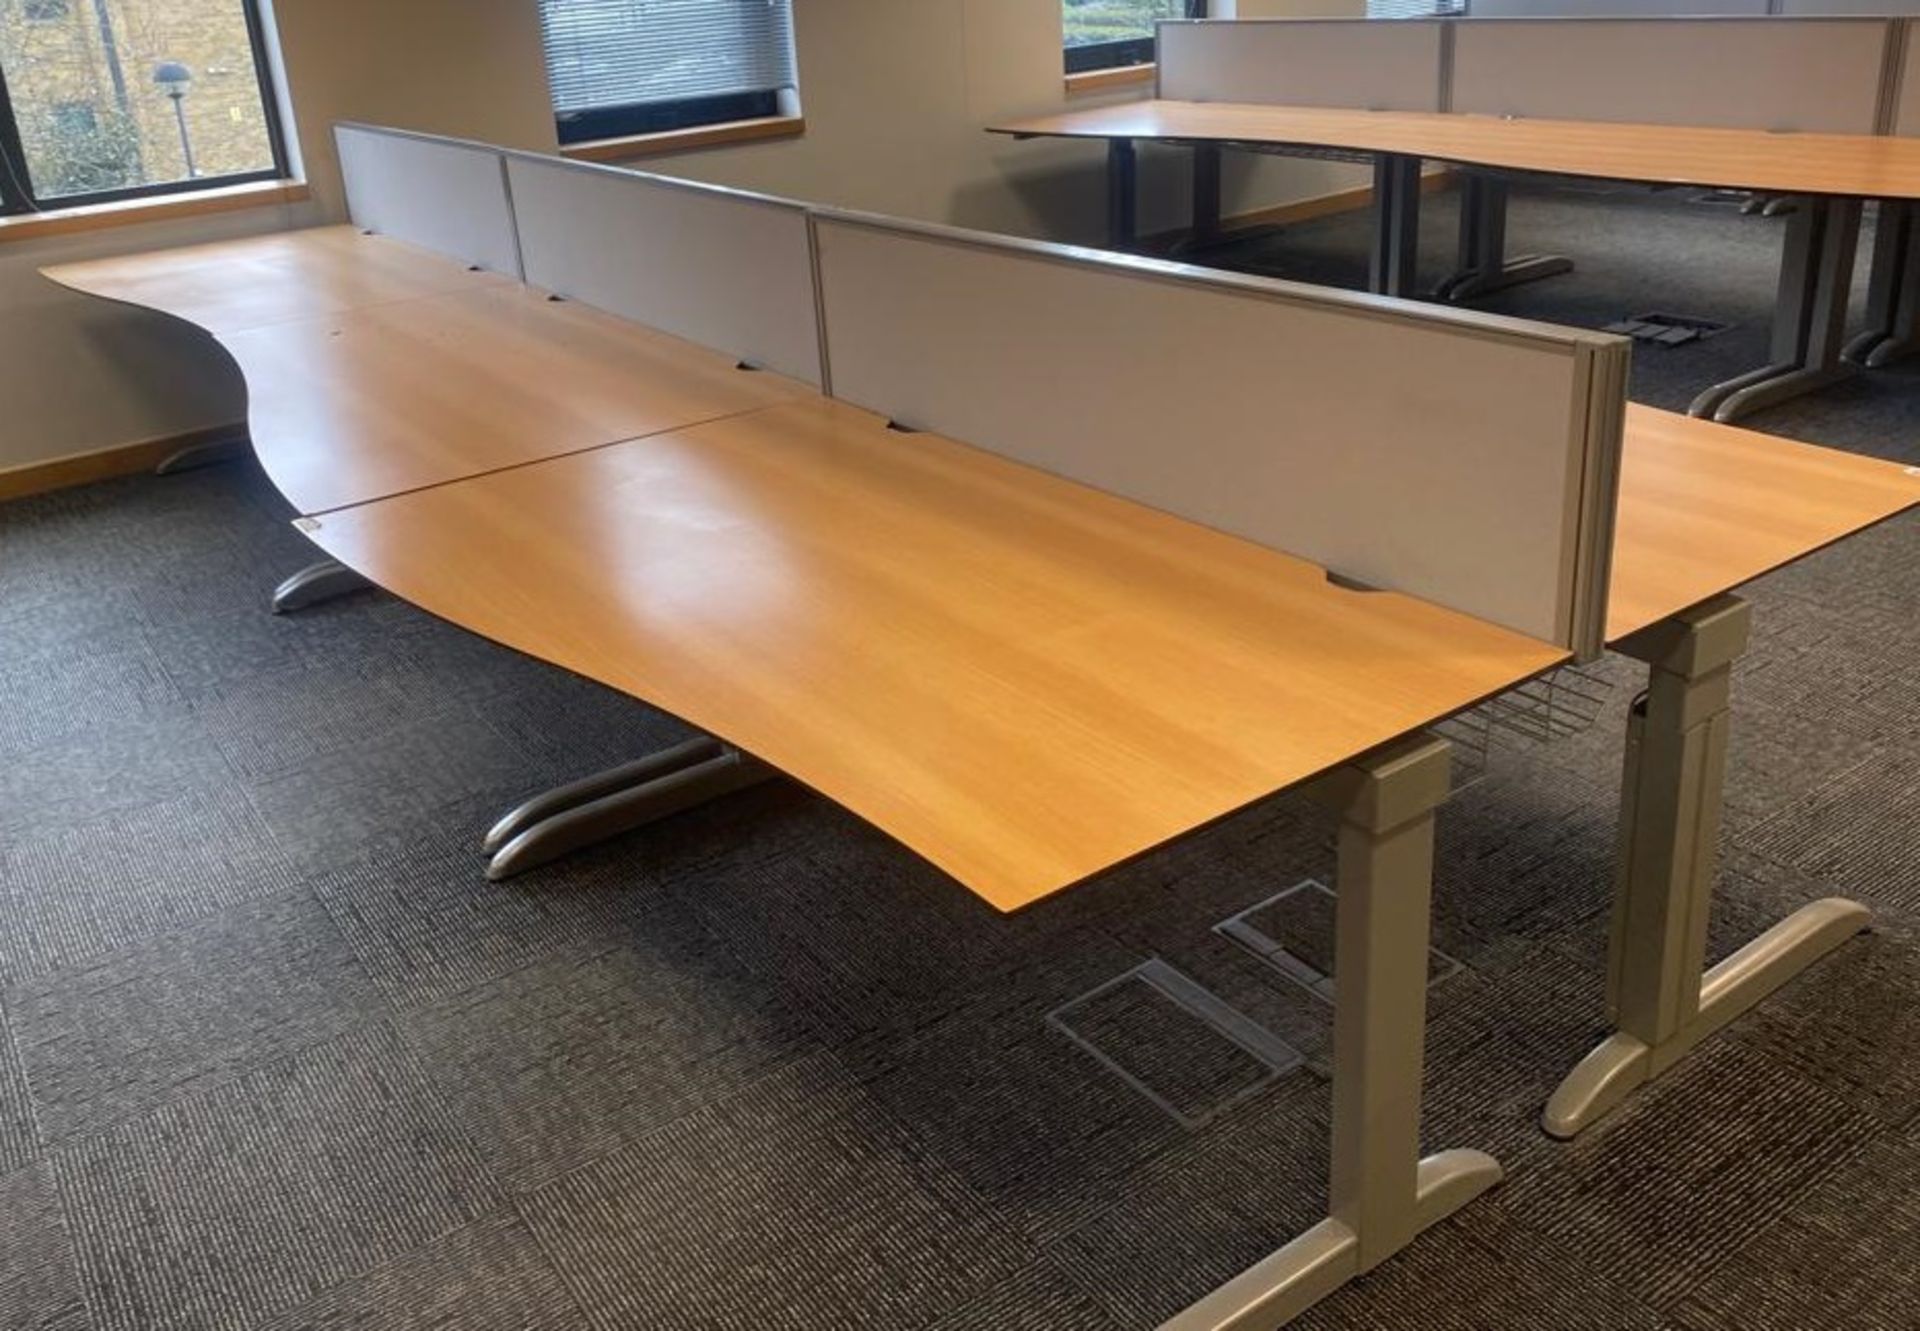 8 x Techo Wave Office Desks With Privacy Panels and Cable Tidy Cages - Beech Wood Finish - Image 6 of 20